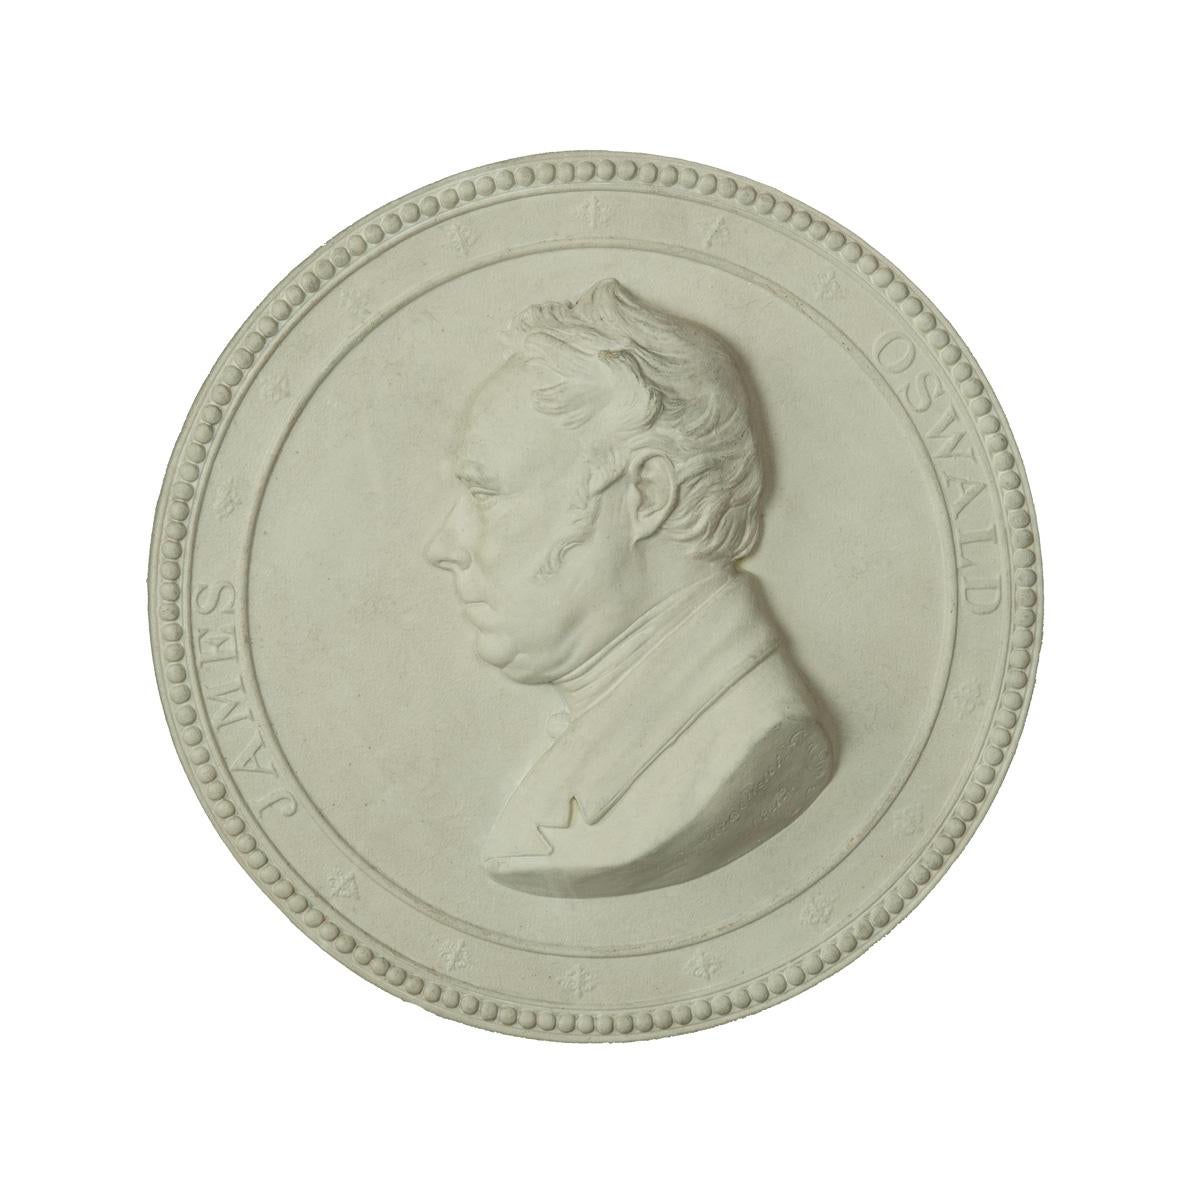 A framed plaster portrait plaque of the Glasgow Reformist MP James Oswald, signed and dated Carlo Marochetti, 1842, of circular form, shown facing to the right within a black border and the original glazed giltwood frame.

Another version of this